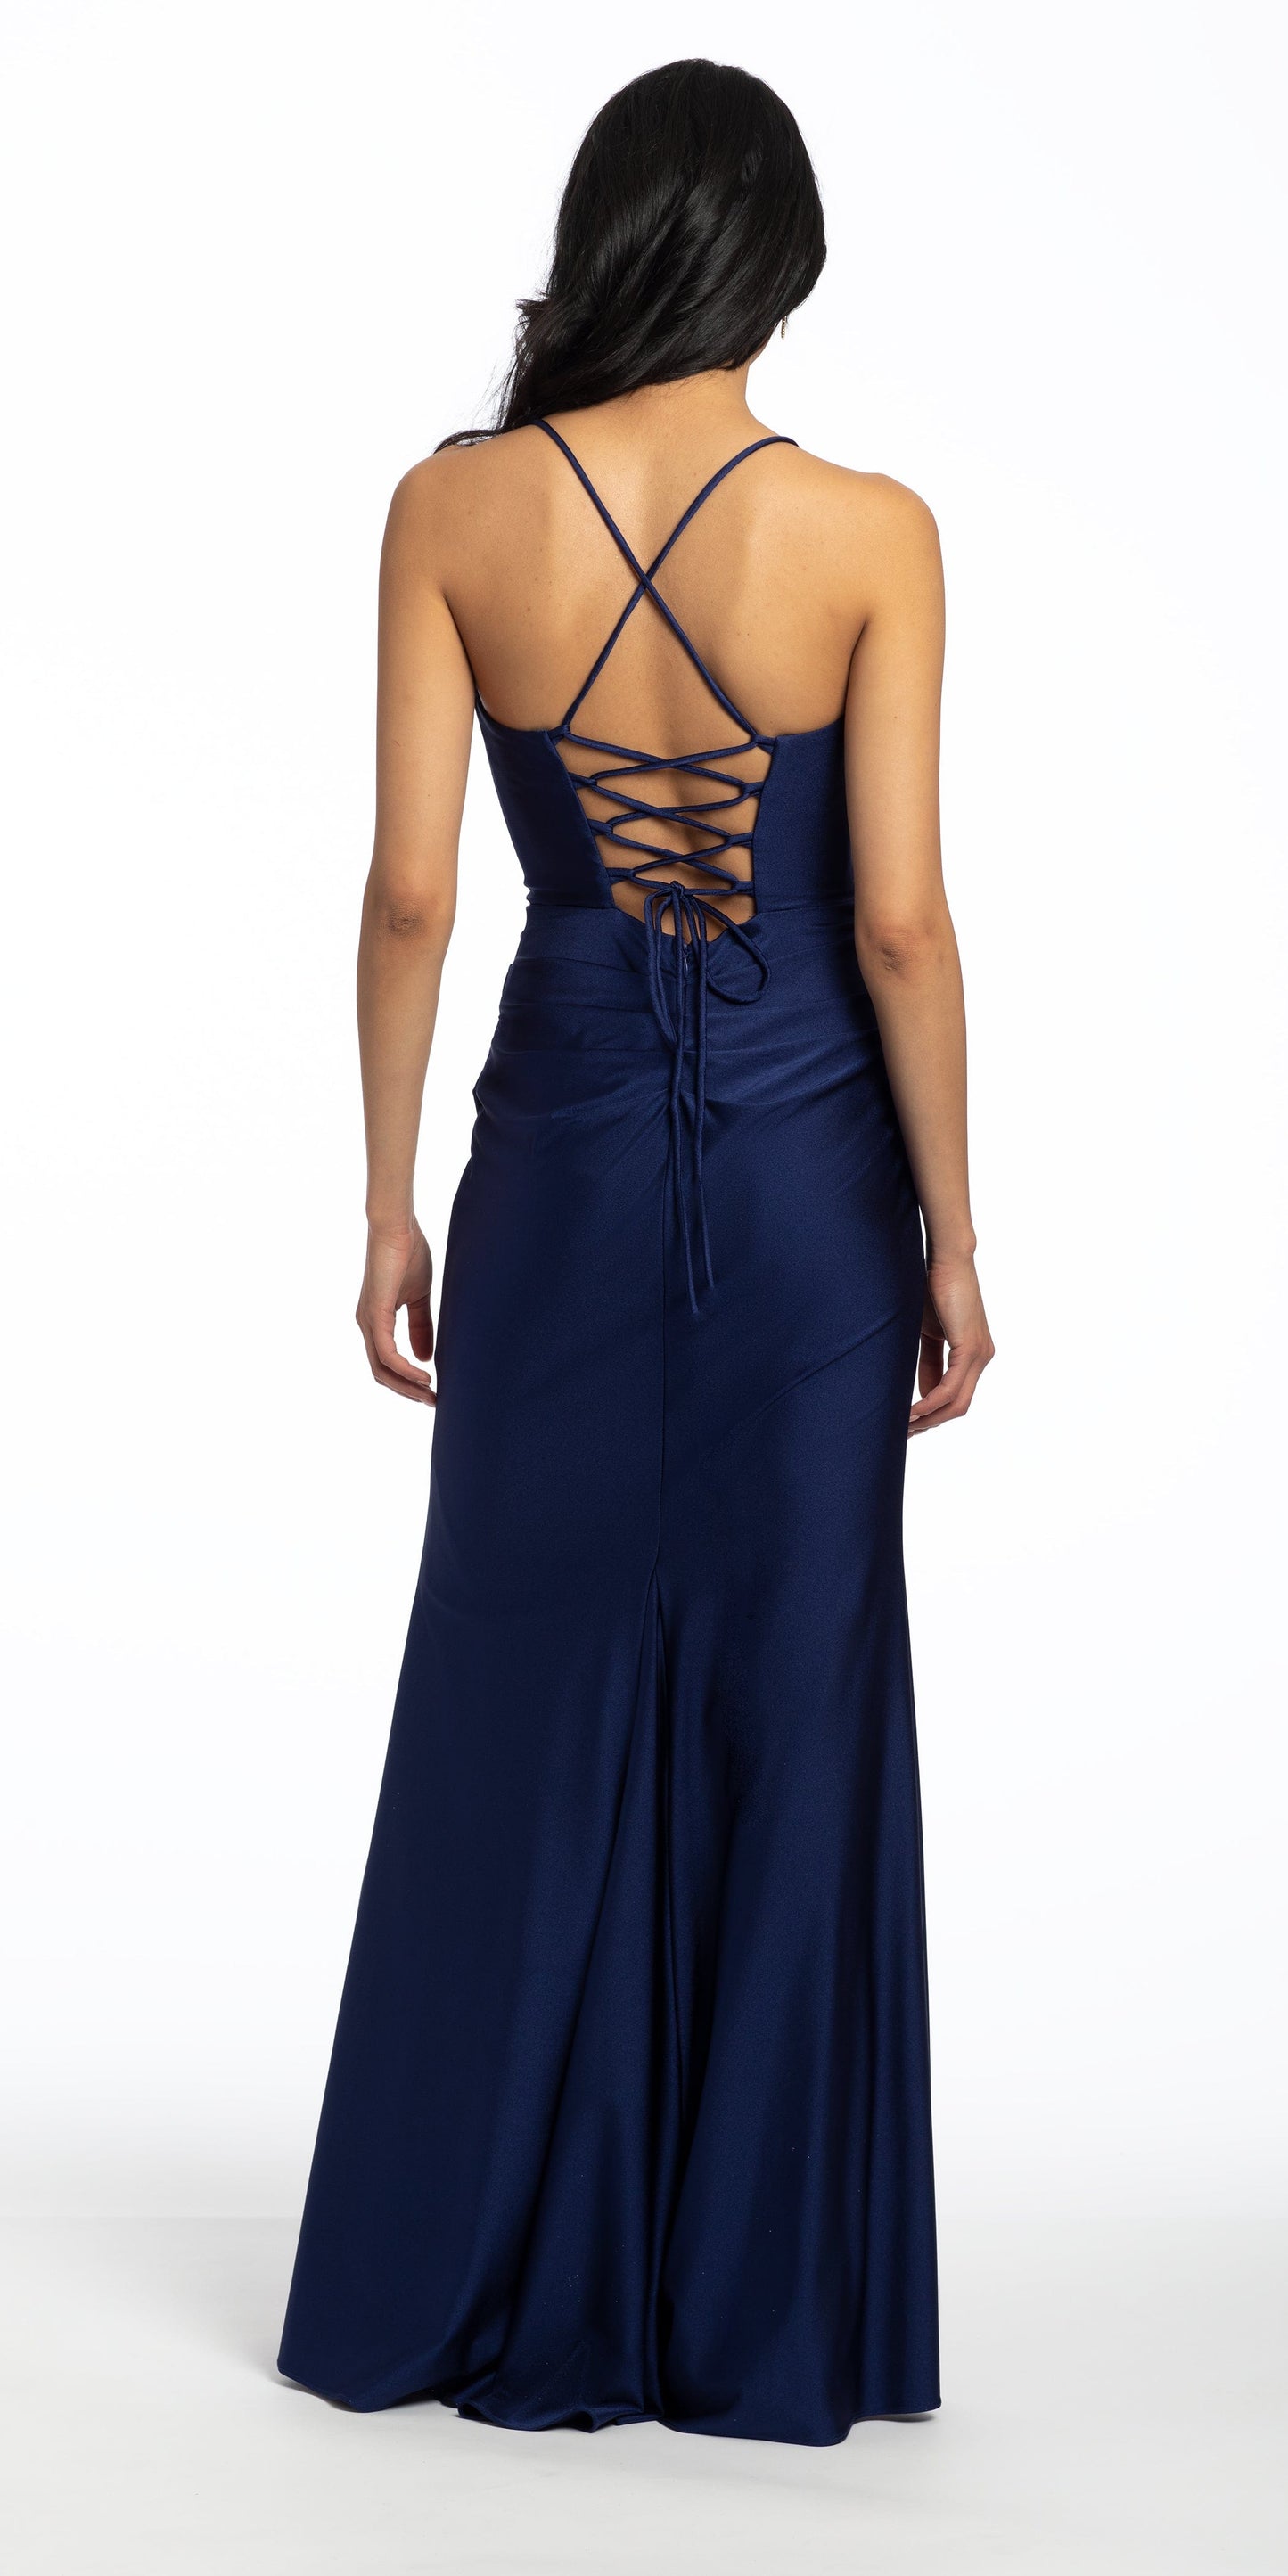 Camille La Vie Stretch Satin Lace Up Back Dress with Train